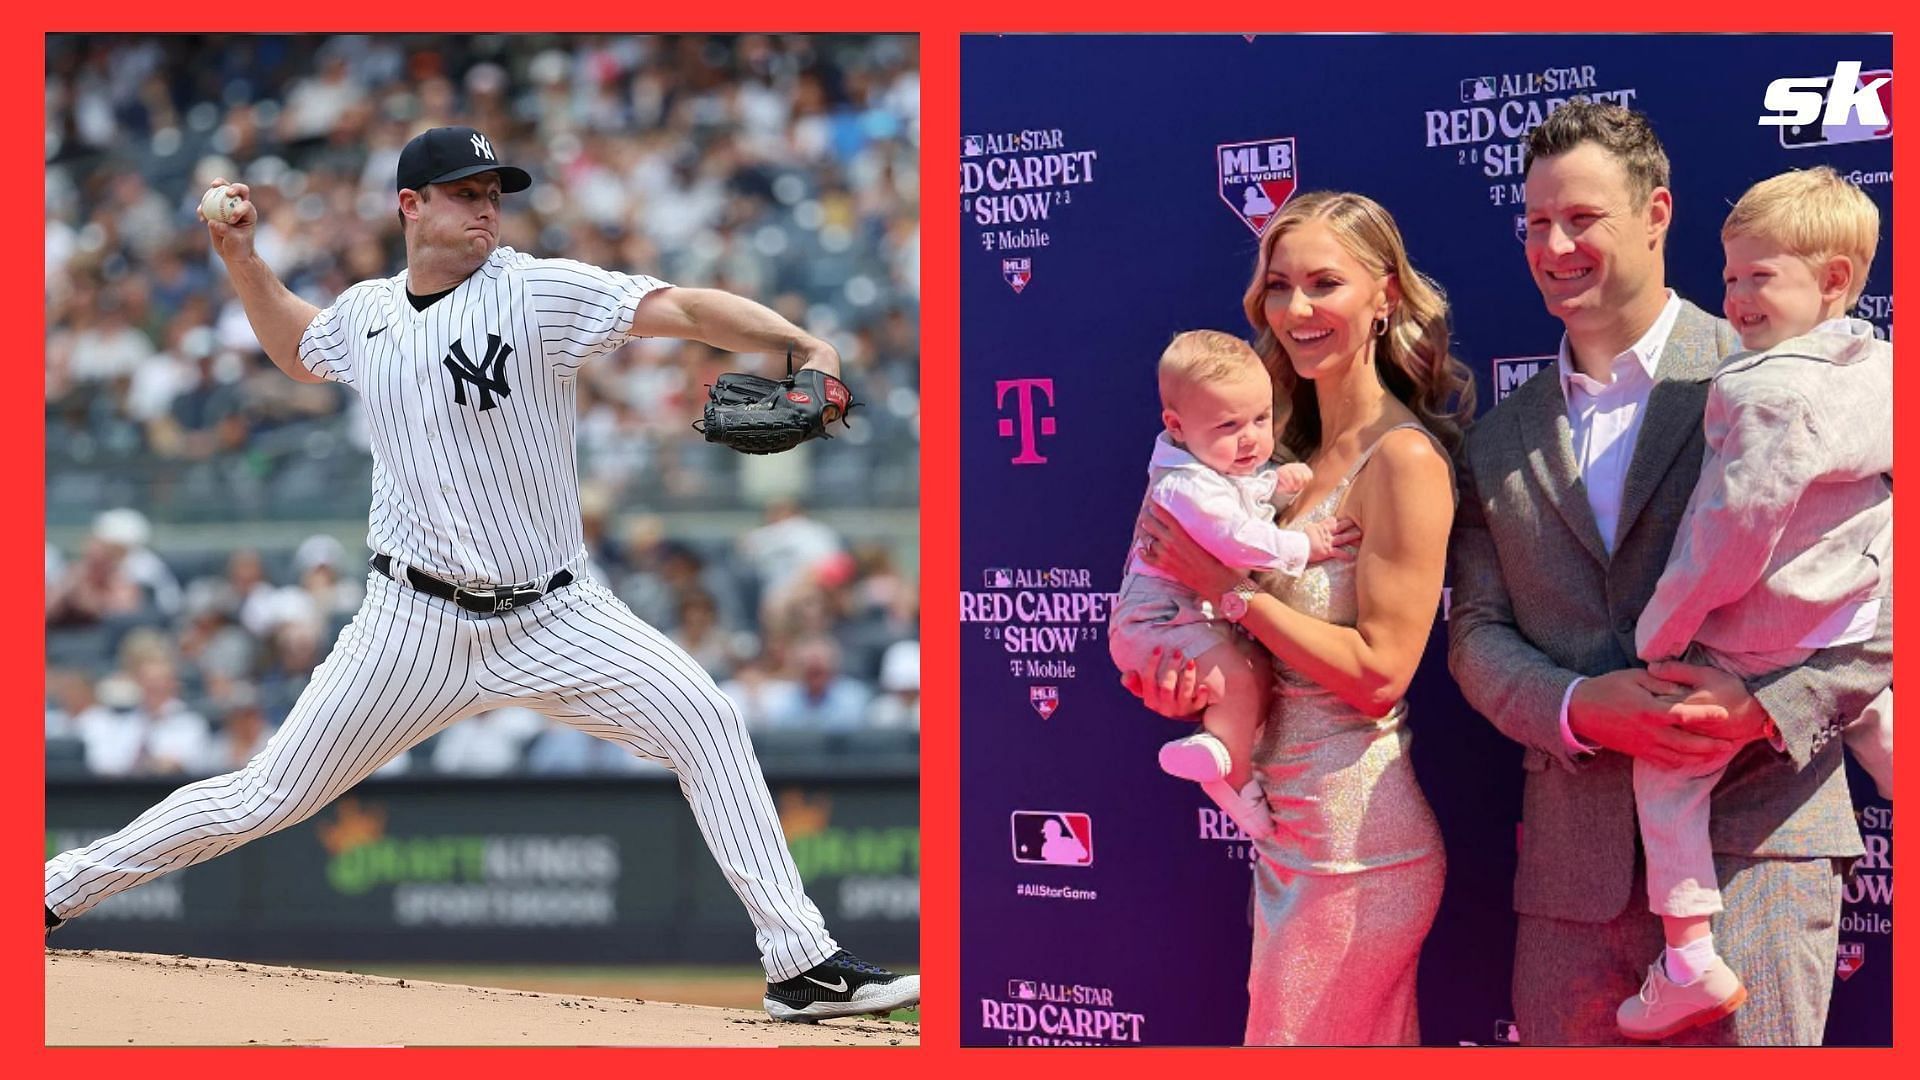 In Photos: Gerrit Cole poses with wife and kids at the MLB All-Star red carpet as he feels grateful &amp; honored to represent the Yankees